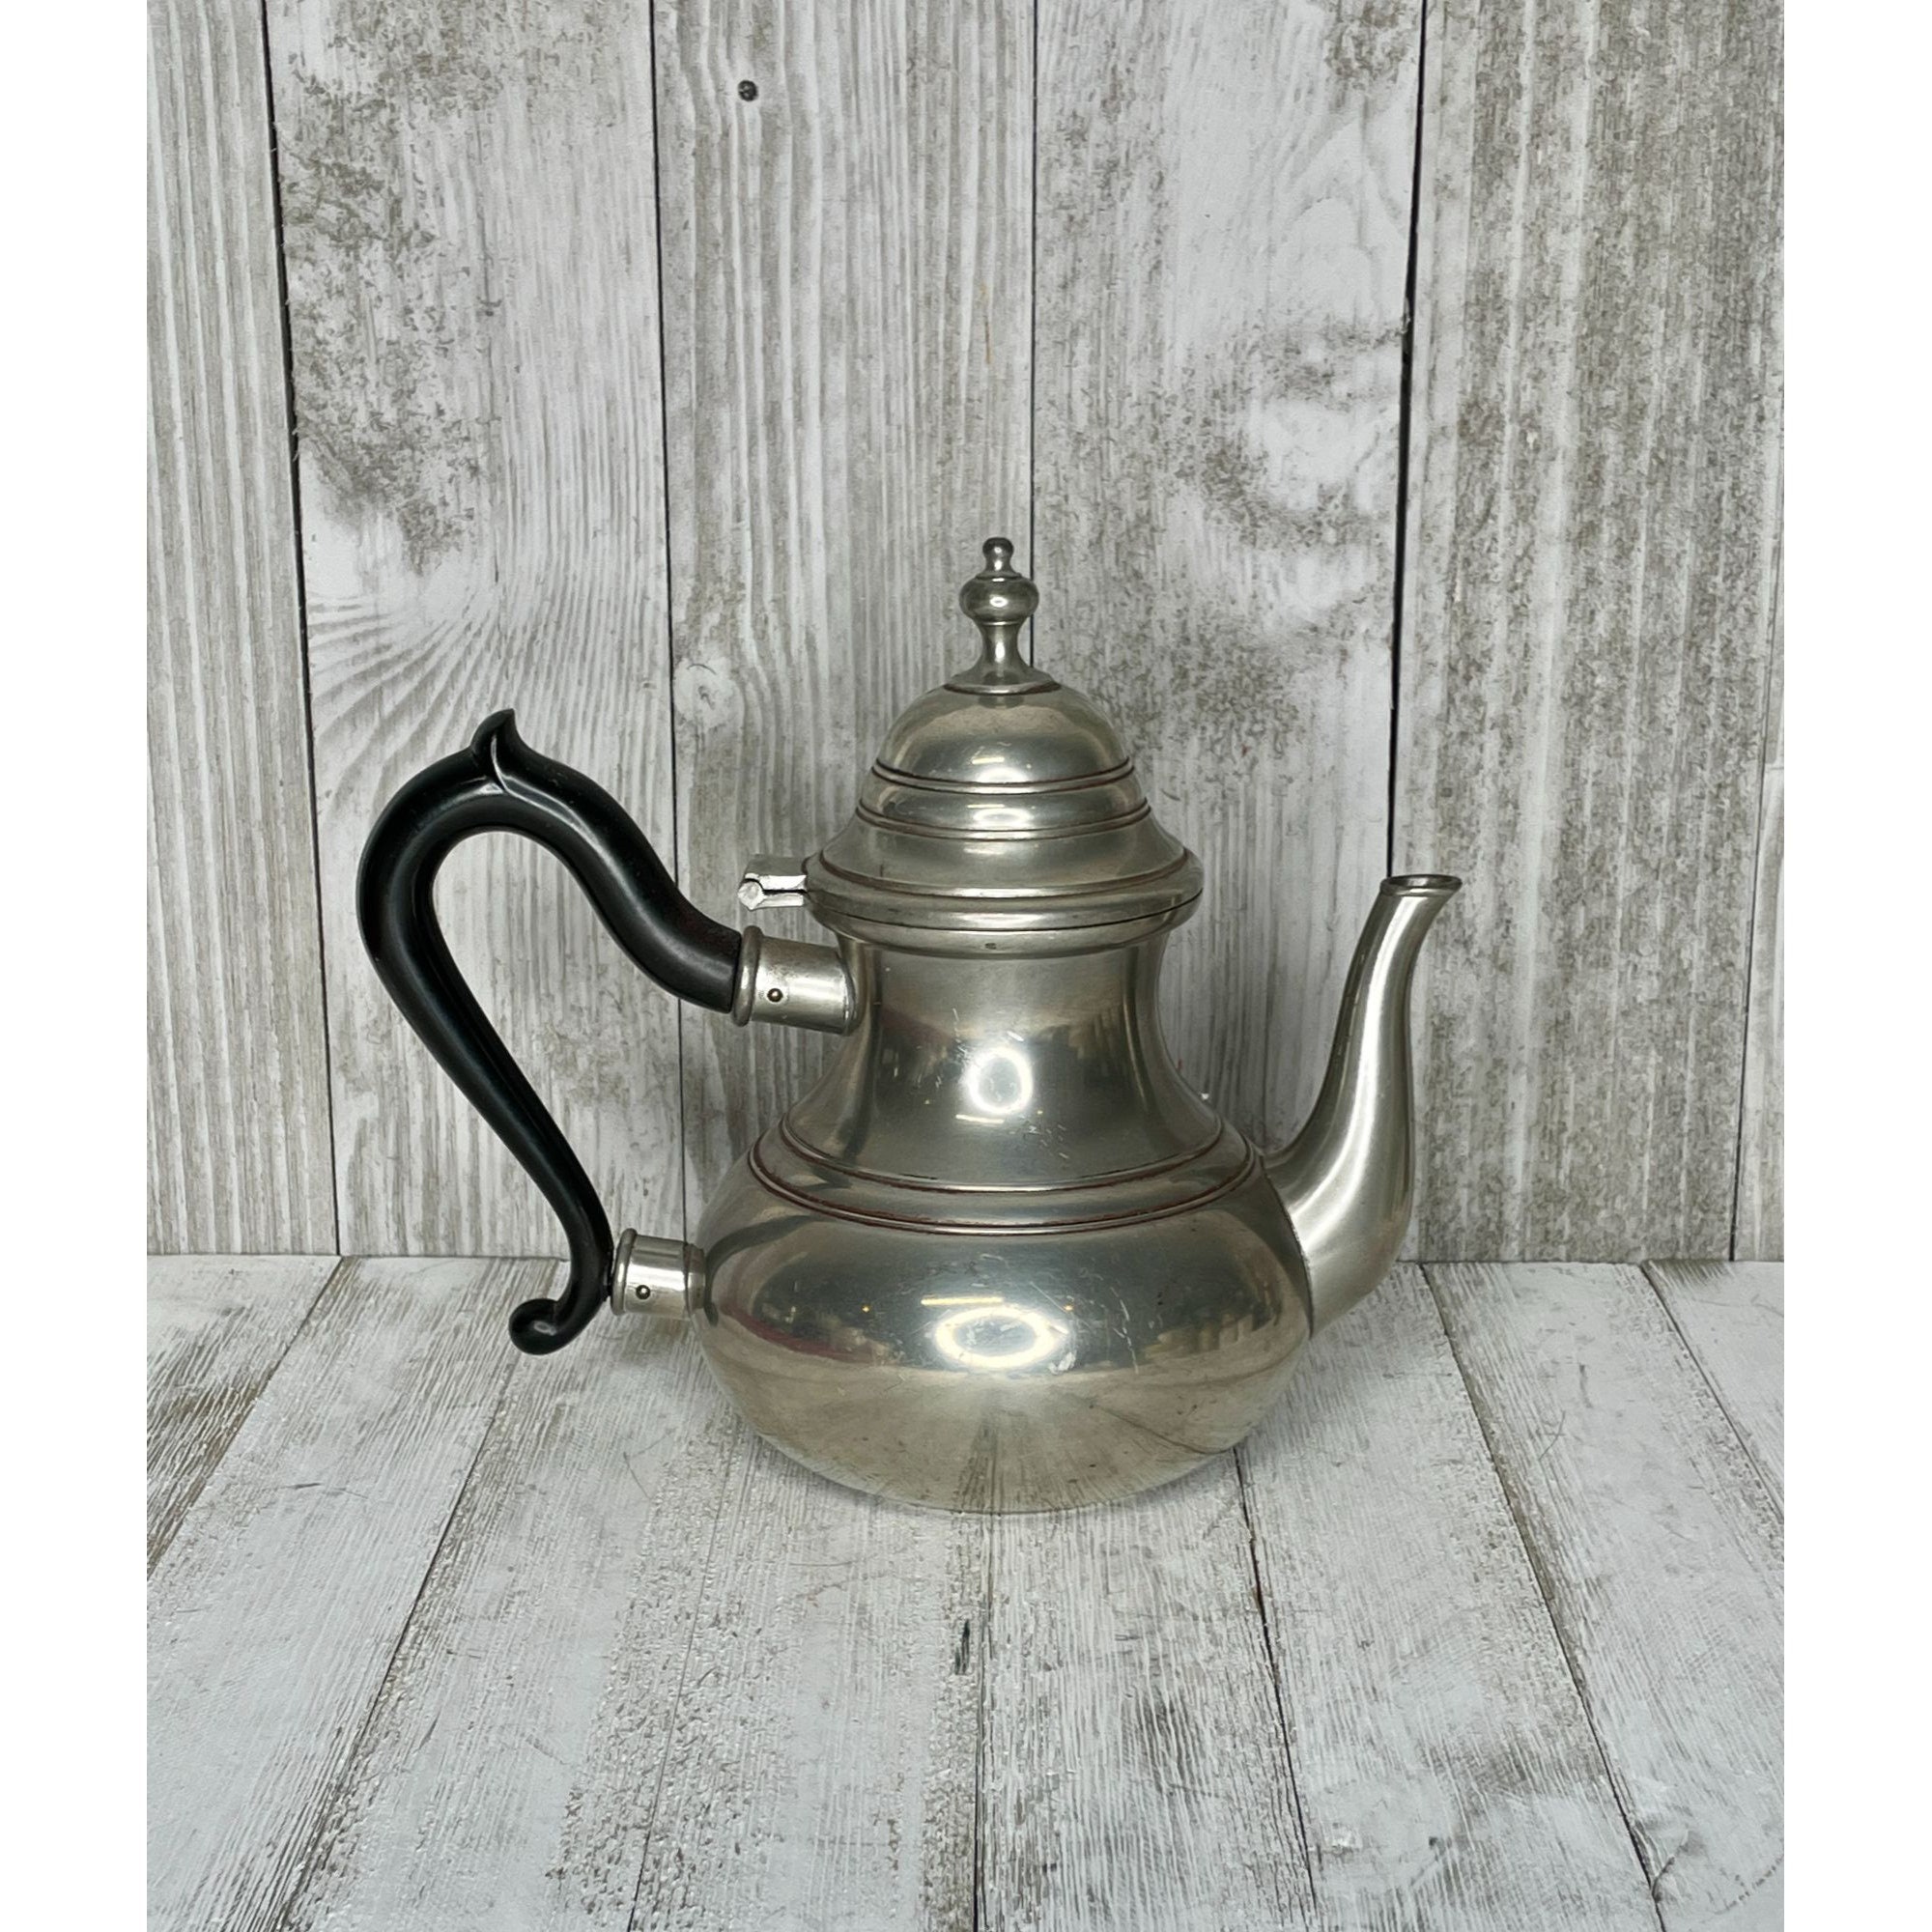 Vintage K S Pewter Tea Pot Plymouth USA Ball Wicker Wrapped Handle